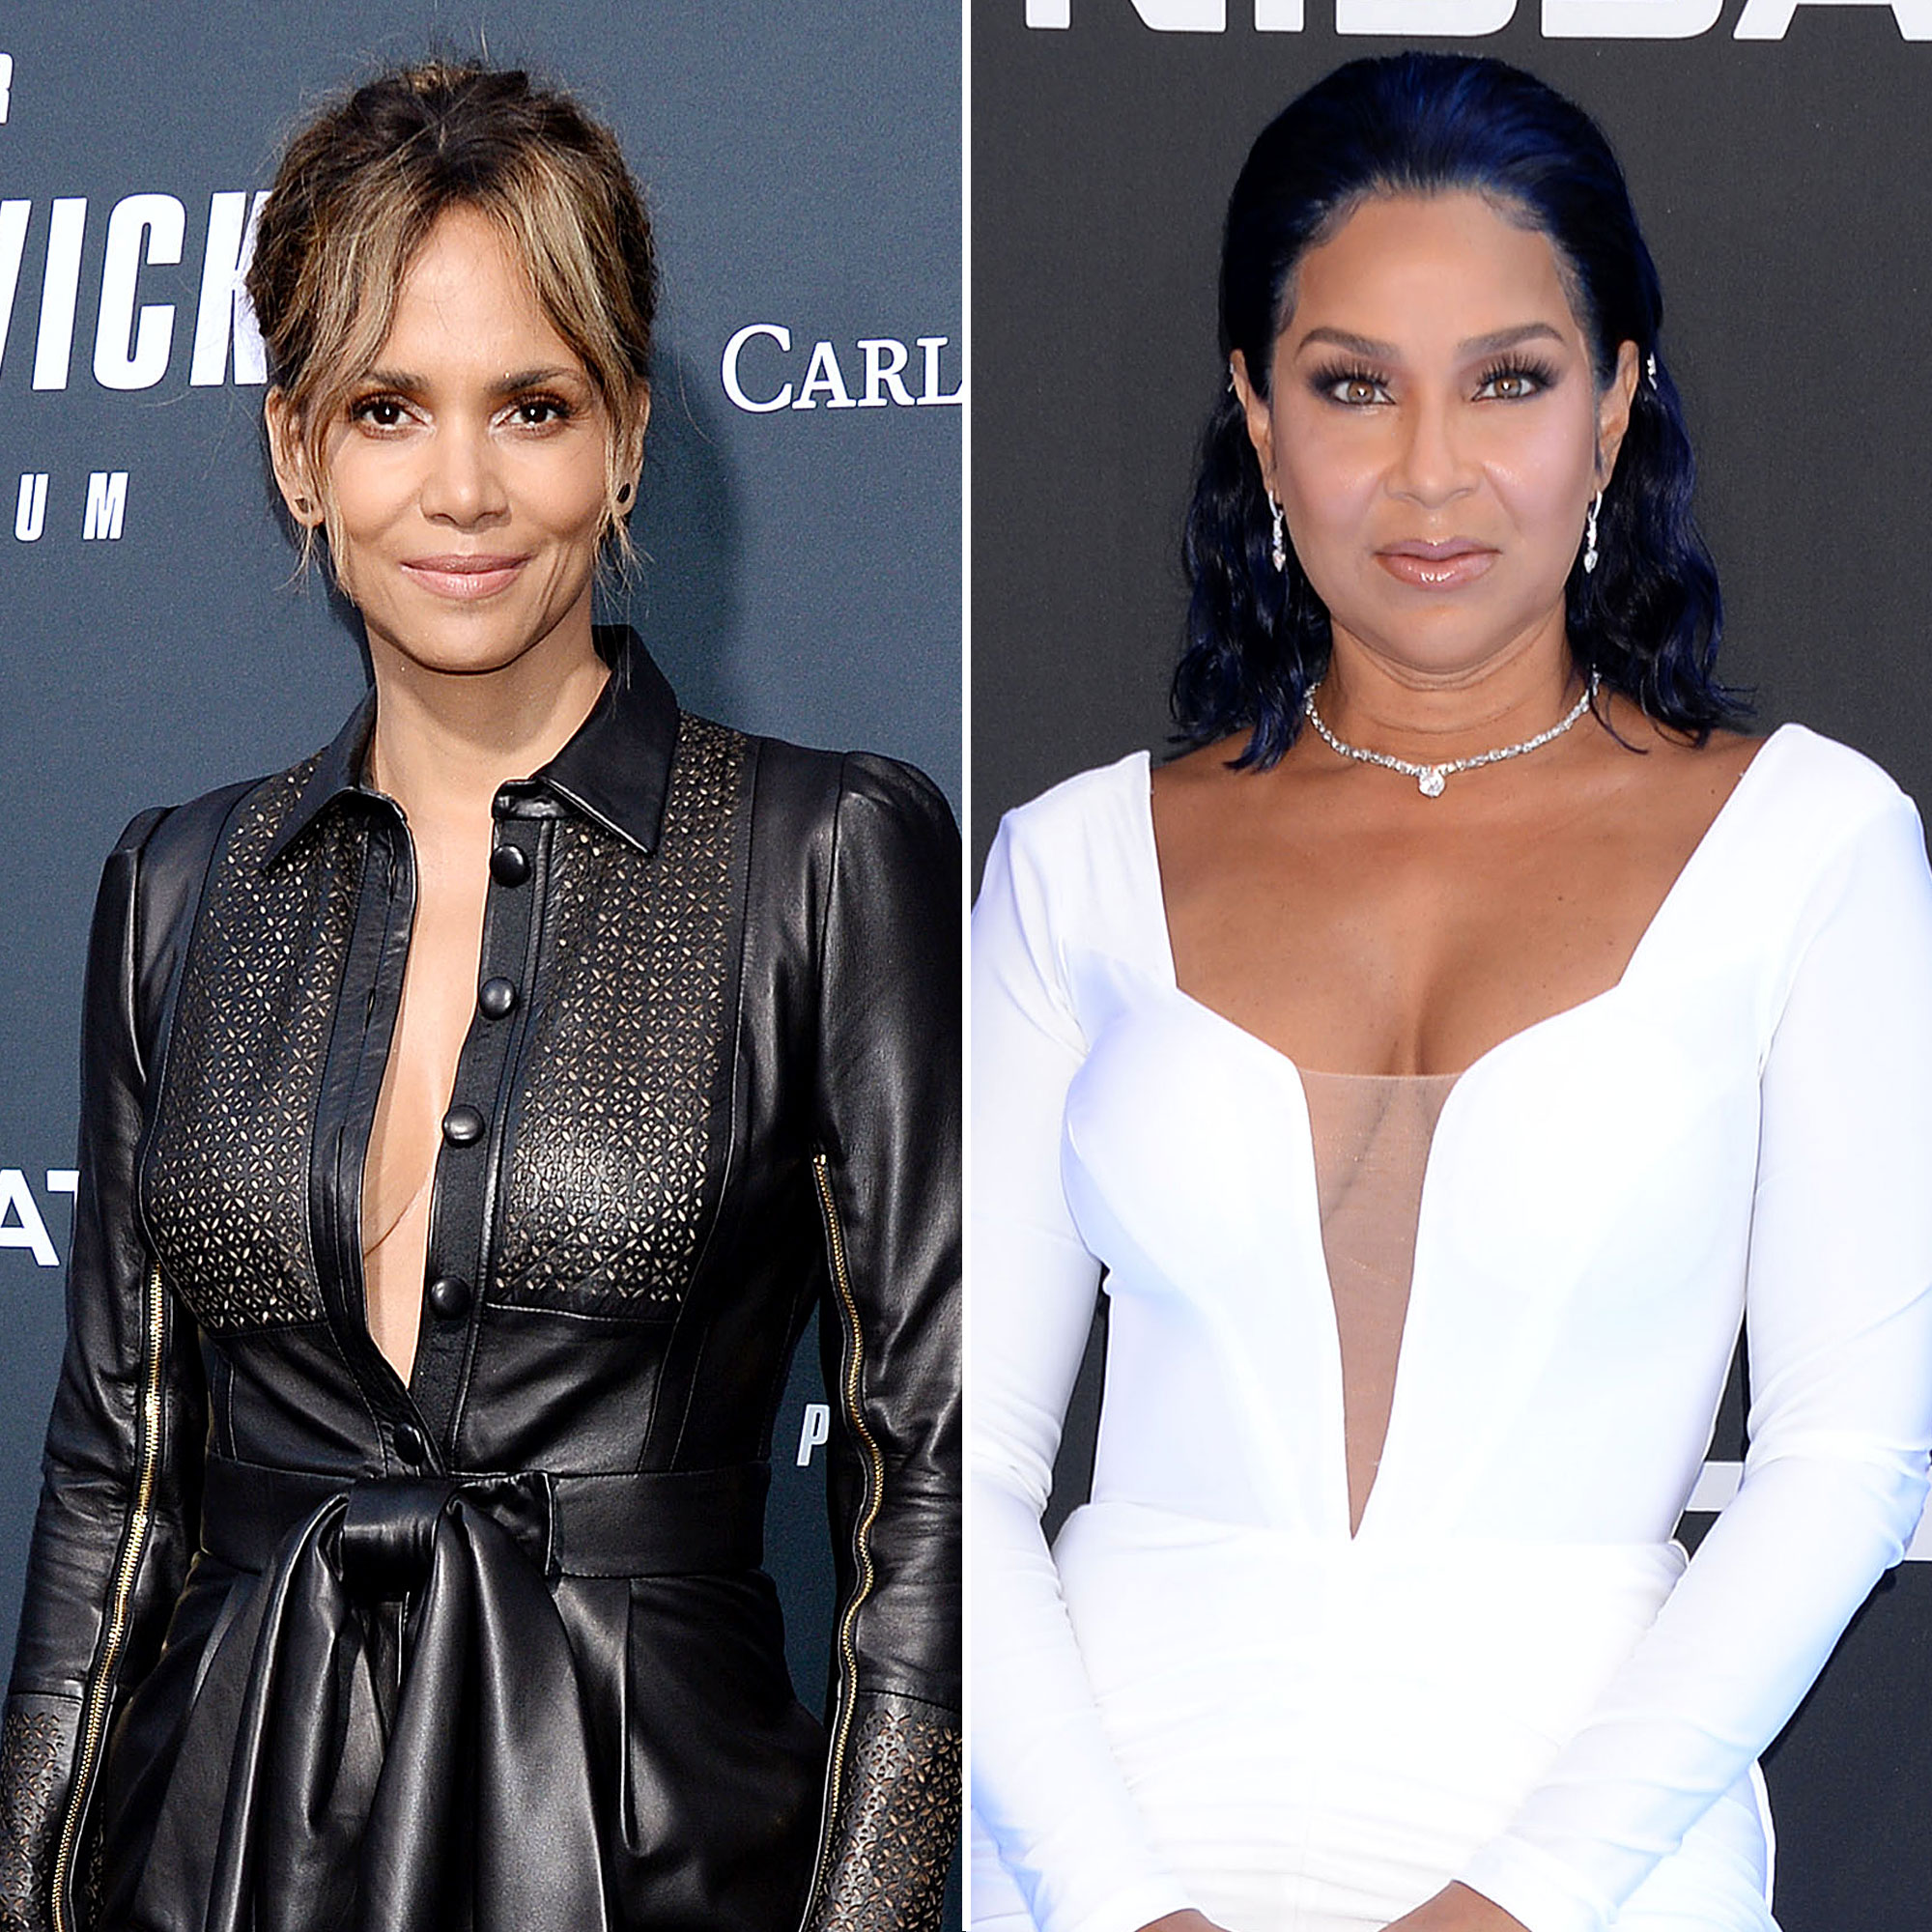 Halle Berry - Halle Berry Fires Back at Claim That She's Bad in Bed